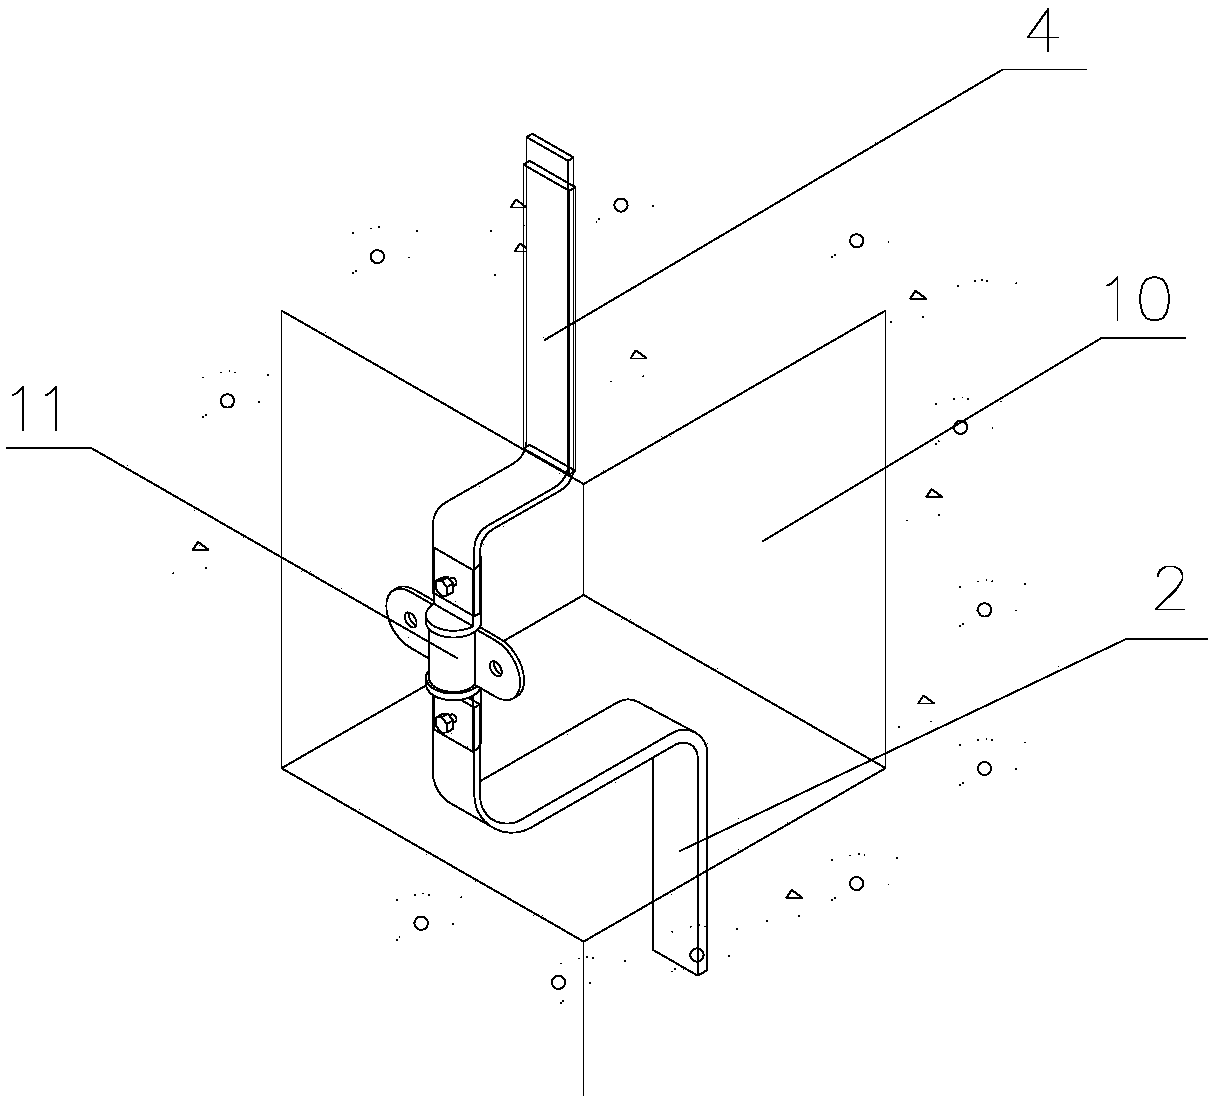 Lightning-proof ground structure for high-rise building and construction method